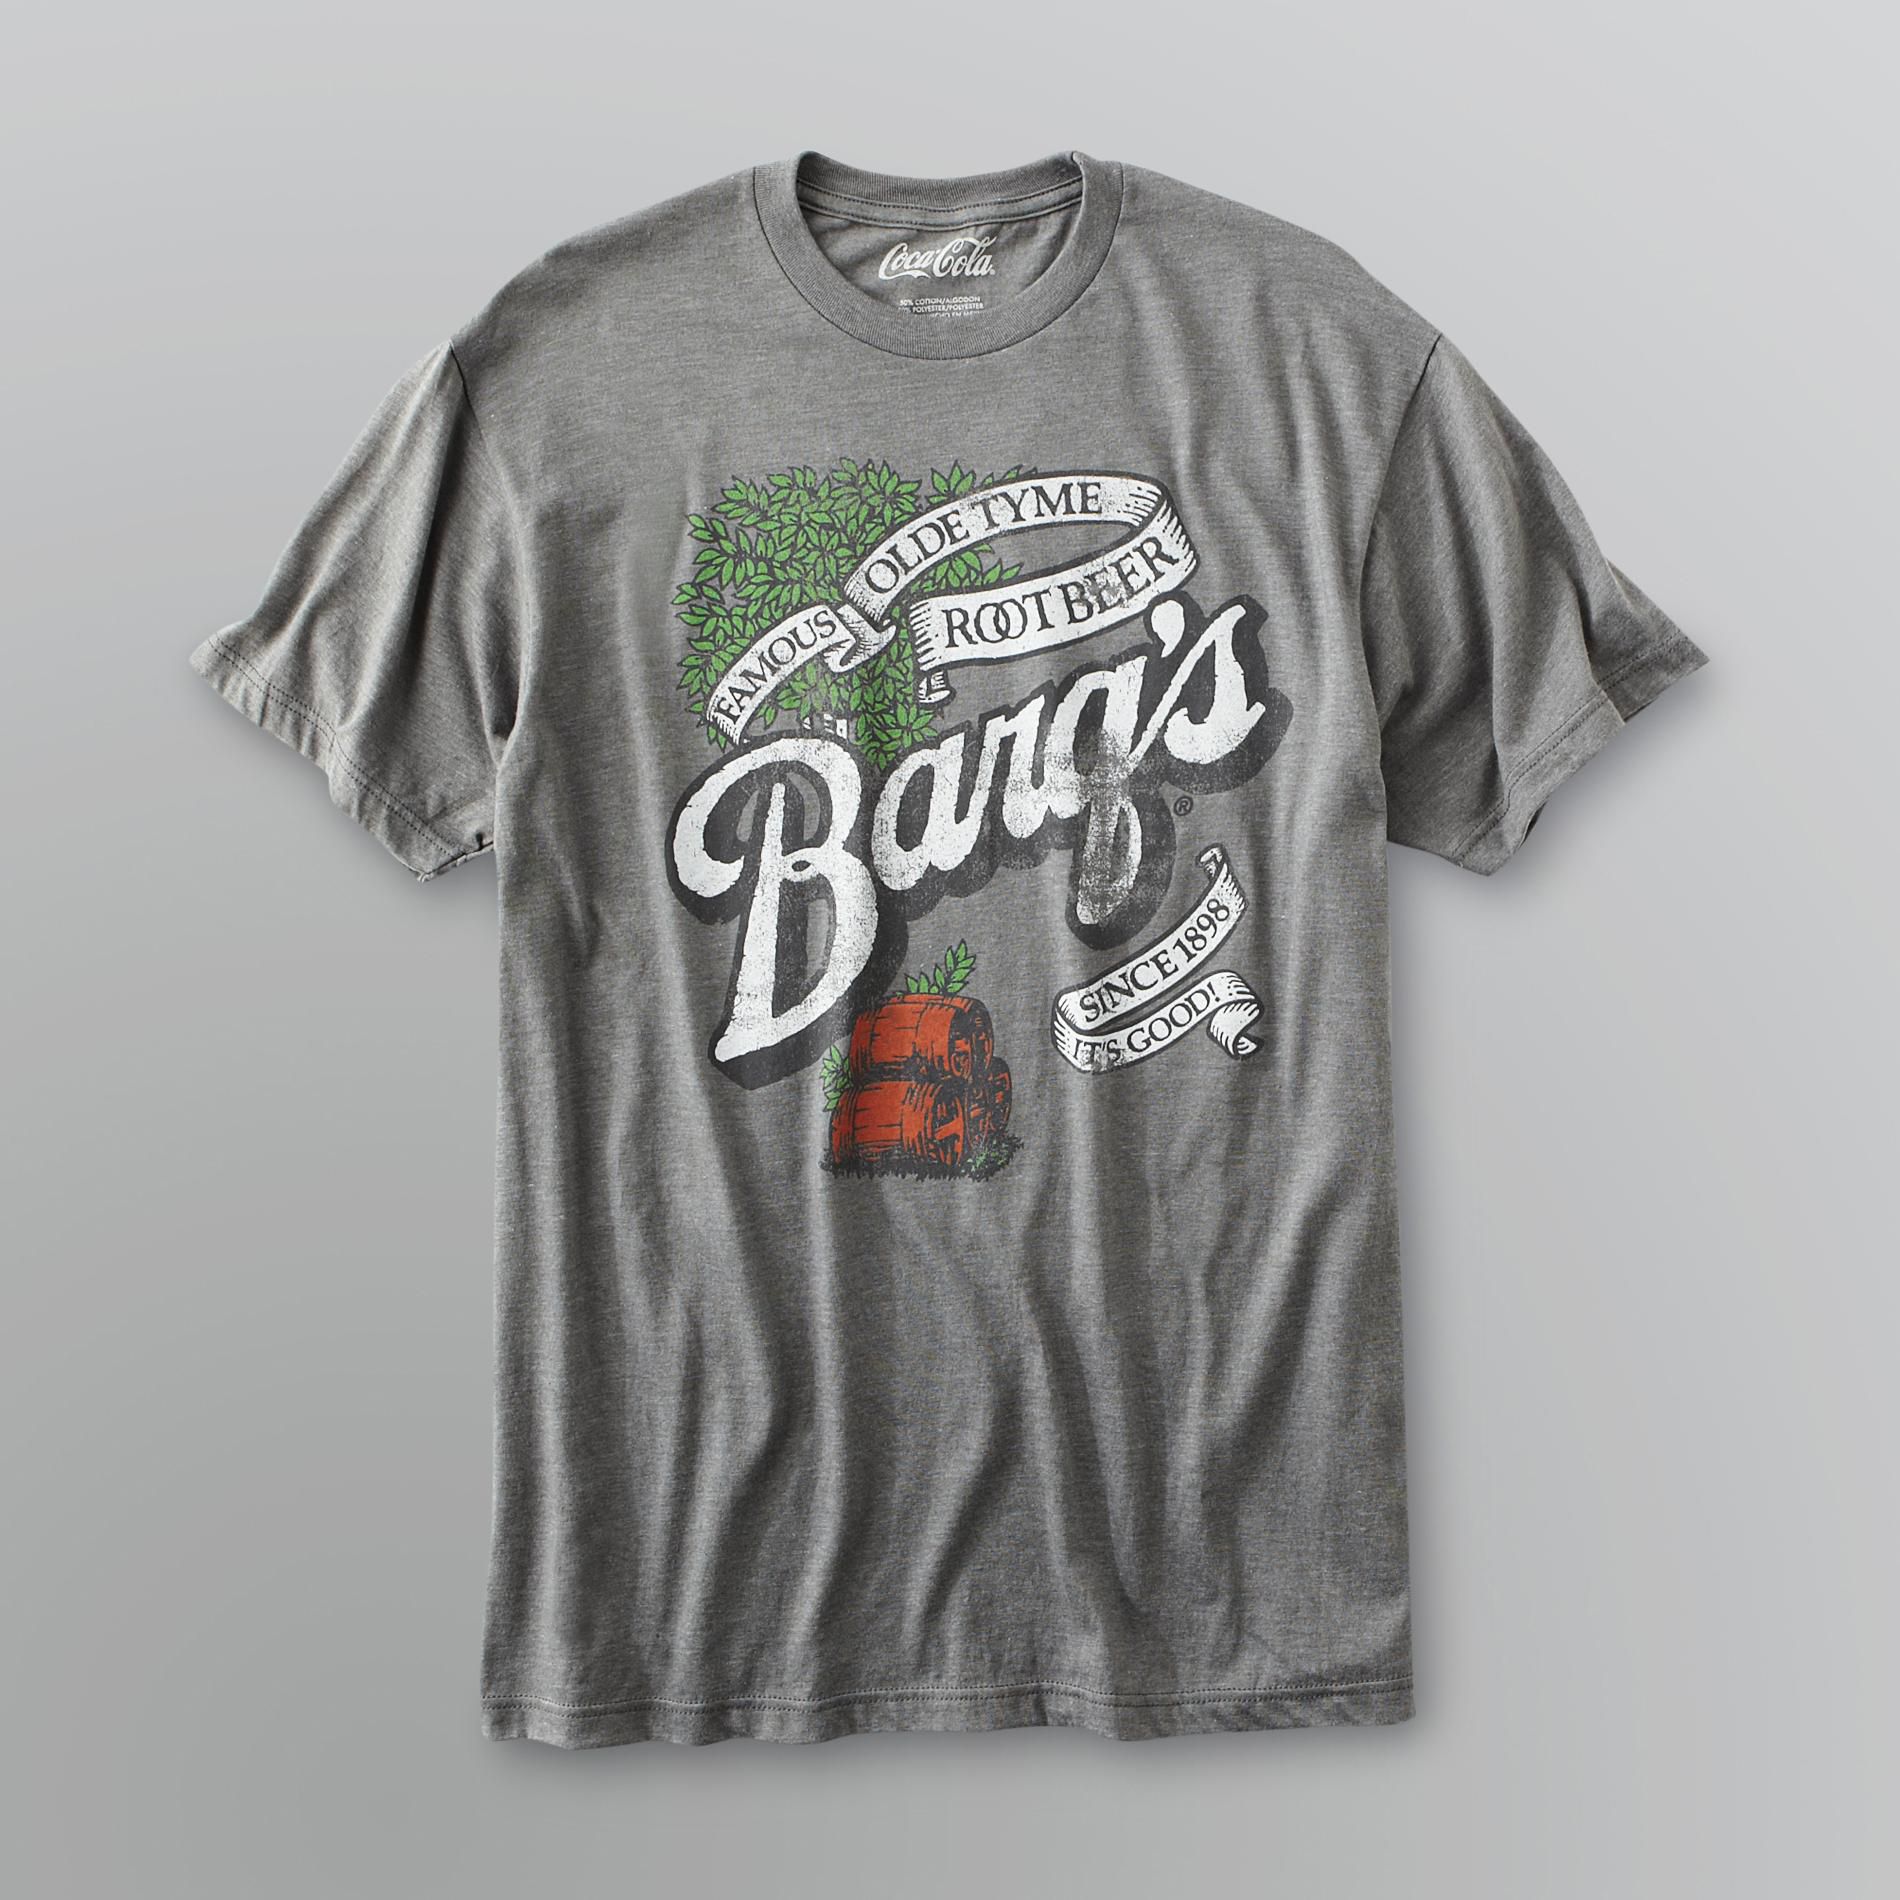 Coca-Cola Young Men's Graphic T-Shirt  - Barq's Root Beer